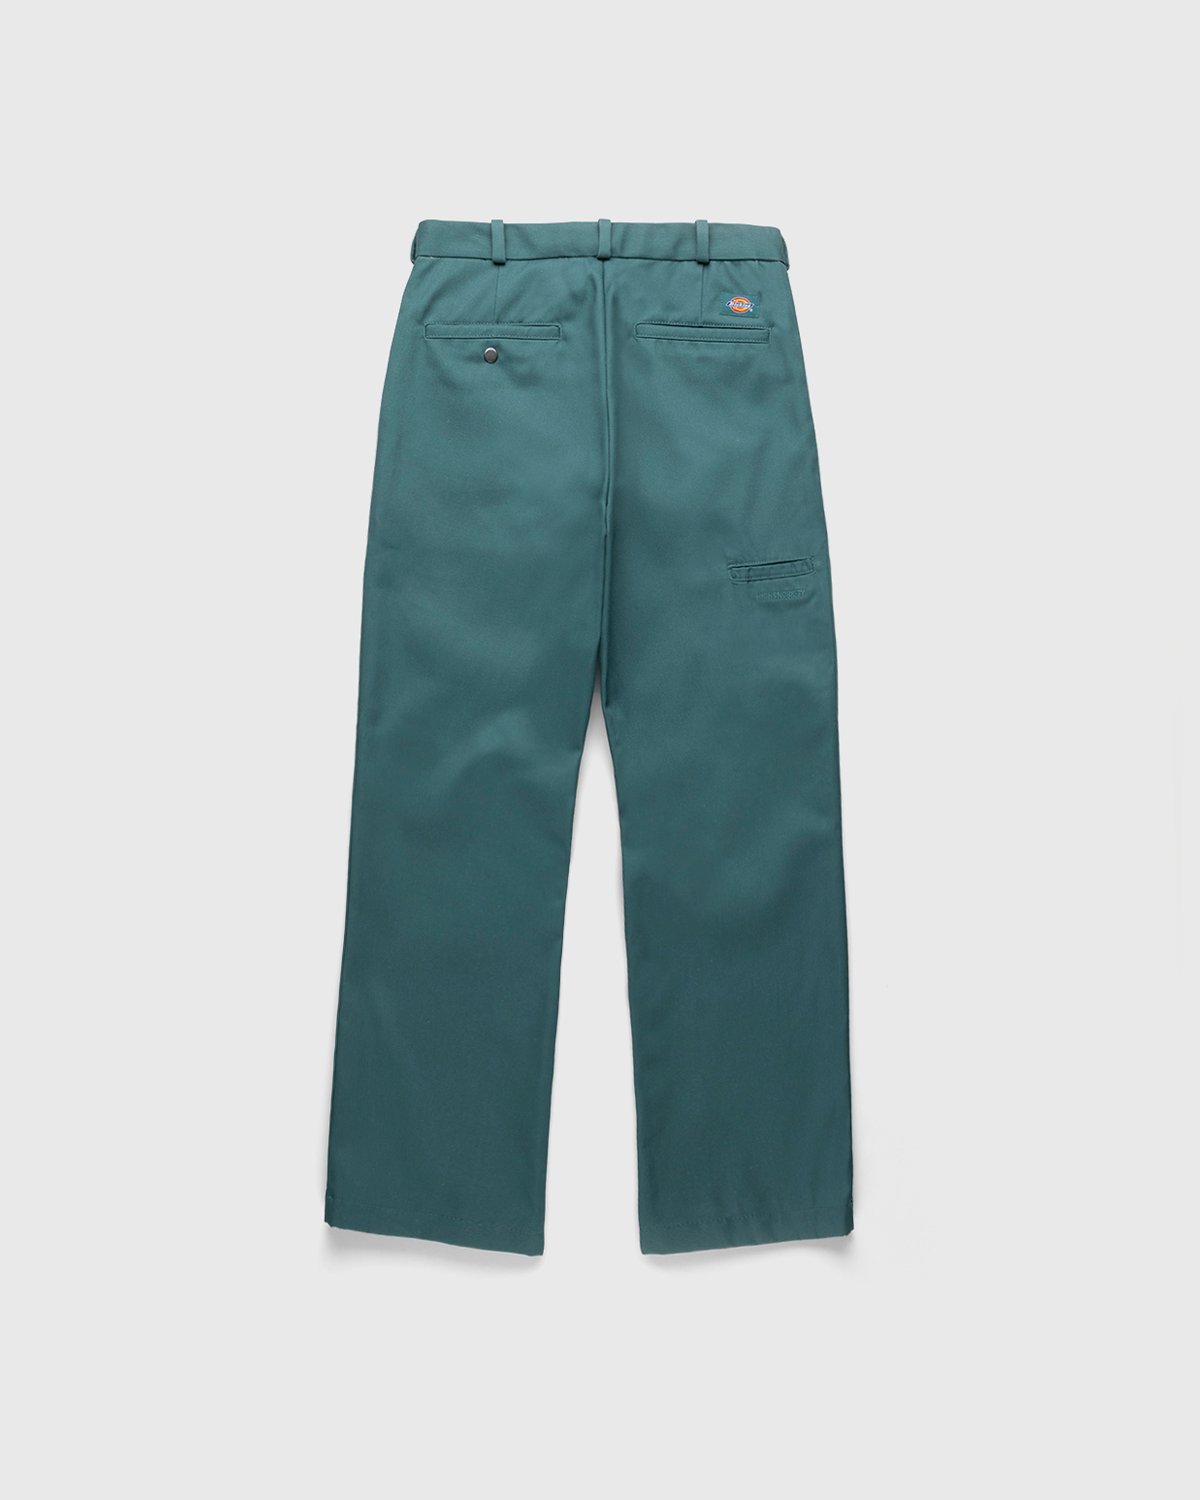 Highsnobiety x Dickies - Pleated Work Pants Lincoln Green - Clothing - Green - Image 2